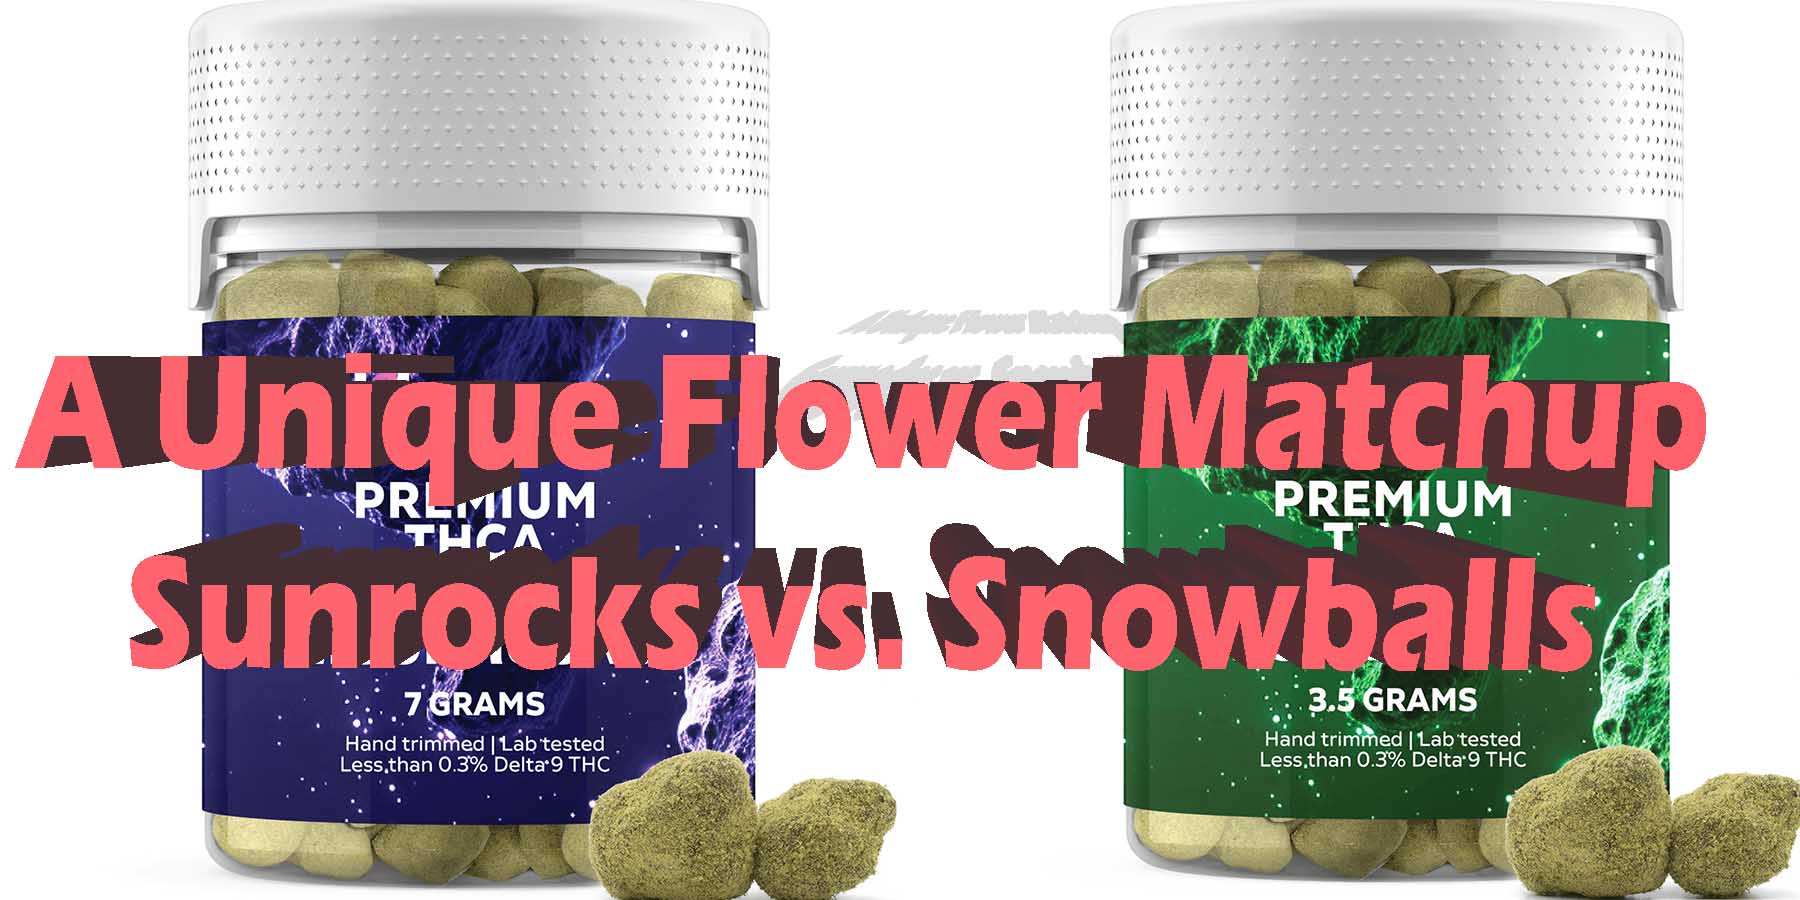 A Unique Flower Matchup Sunrocks vs Snowballs LowestPrice Coupon Discount For Smoking Best High Smoke Shop Online Near Me Bloomz